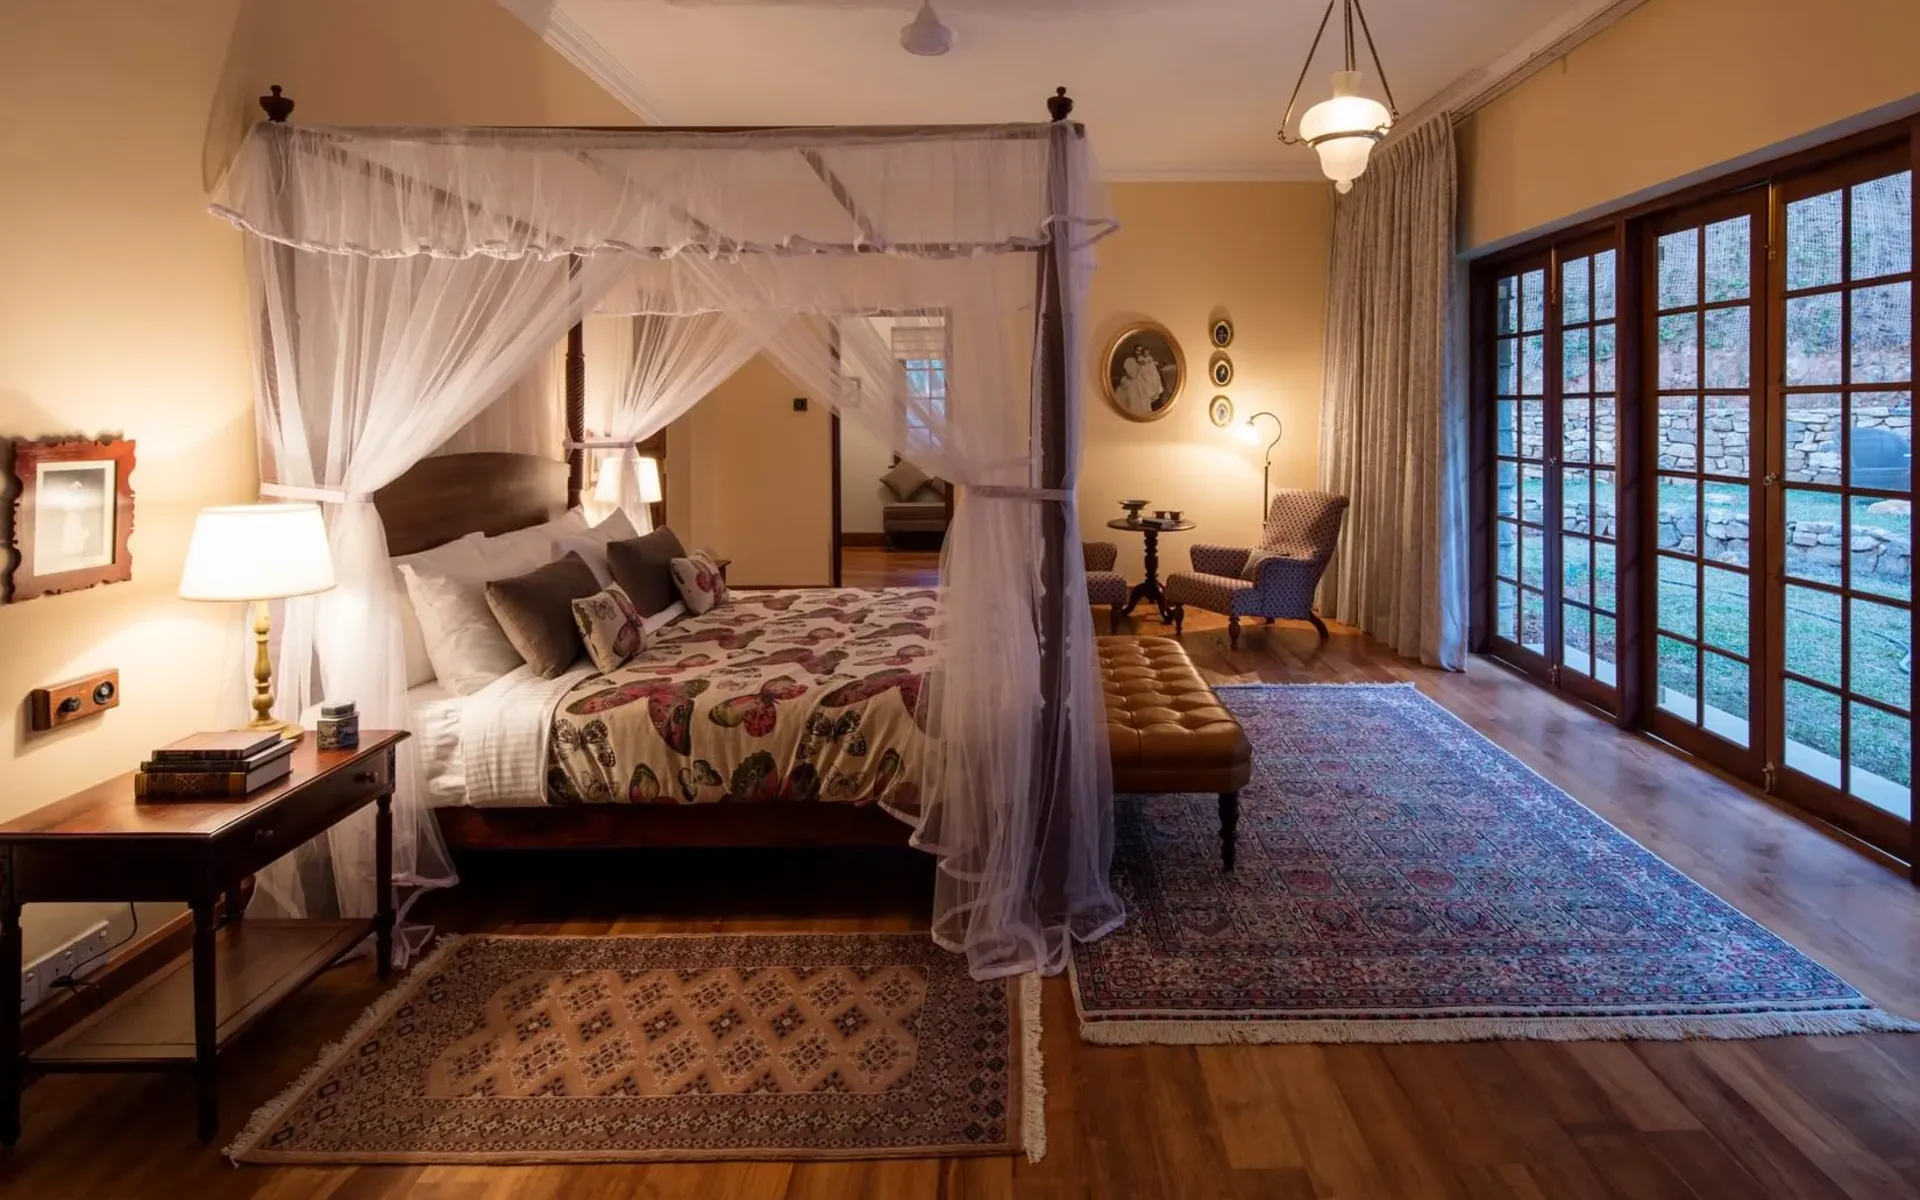 A bedroom in the Owner's Cottage of Dunkeld Bungalow, dressed in an opulent, old-fashioned design.